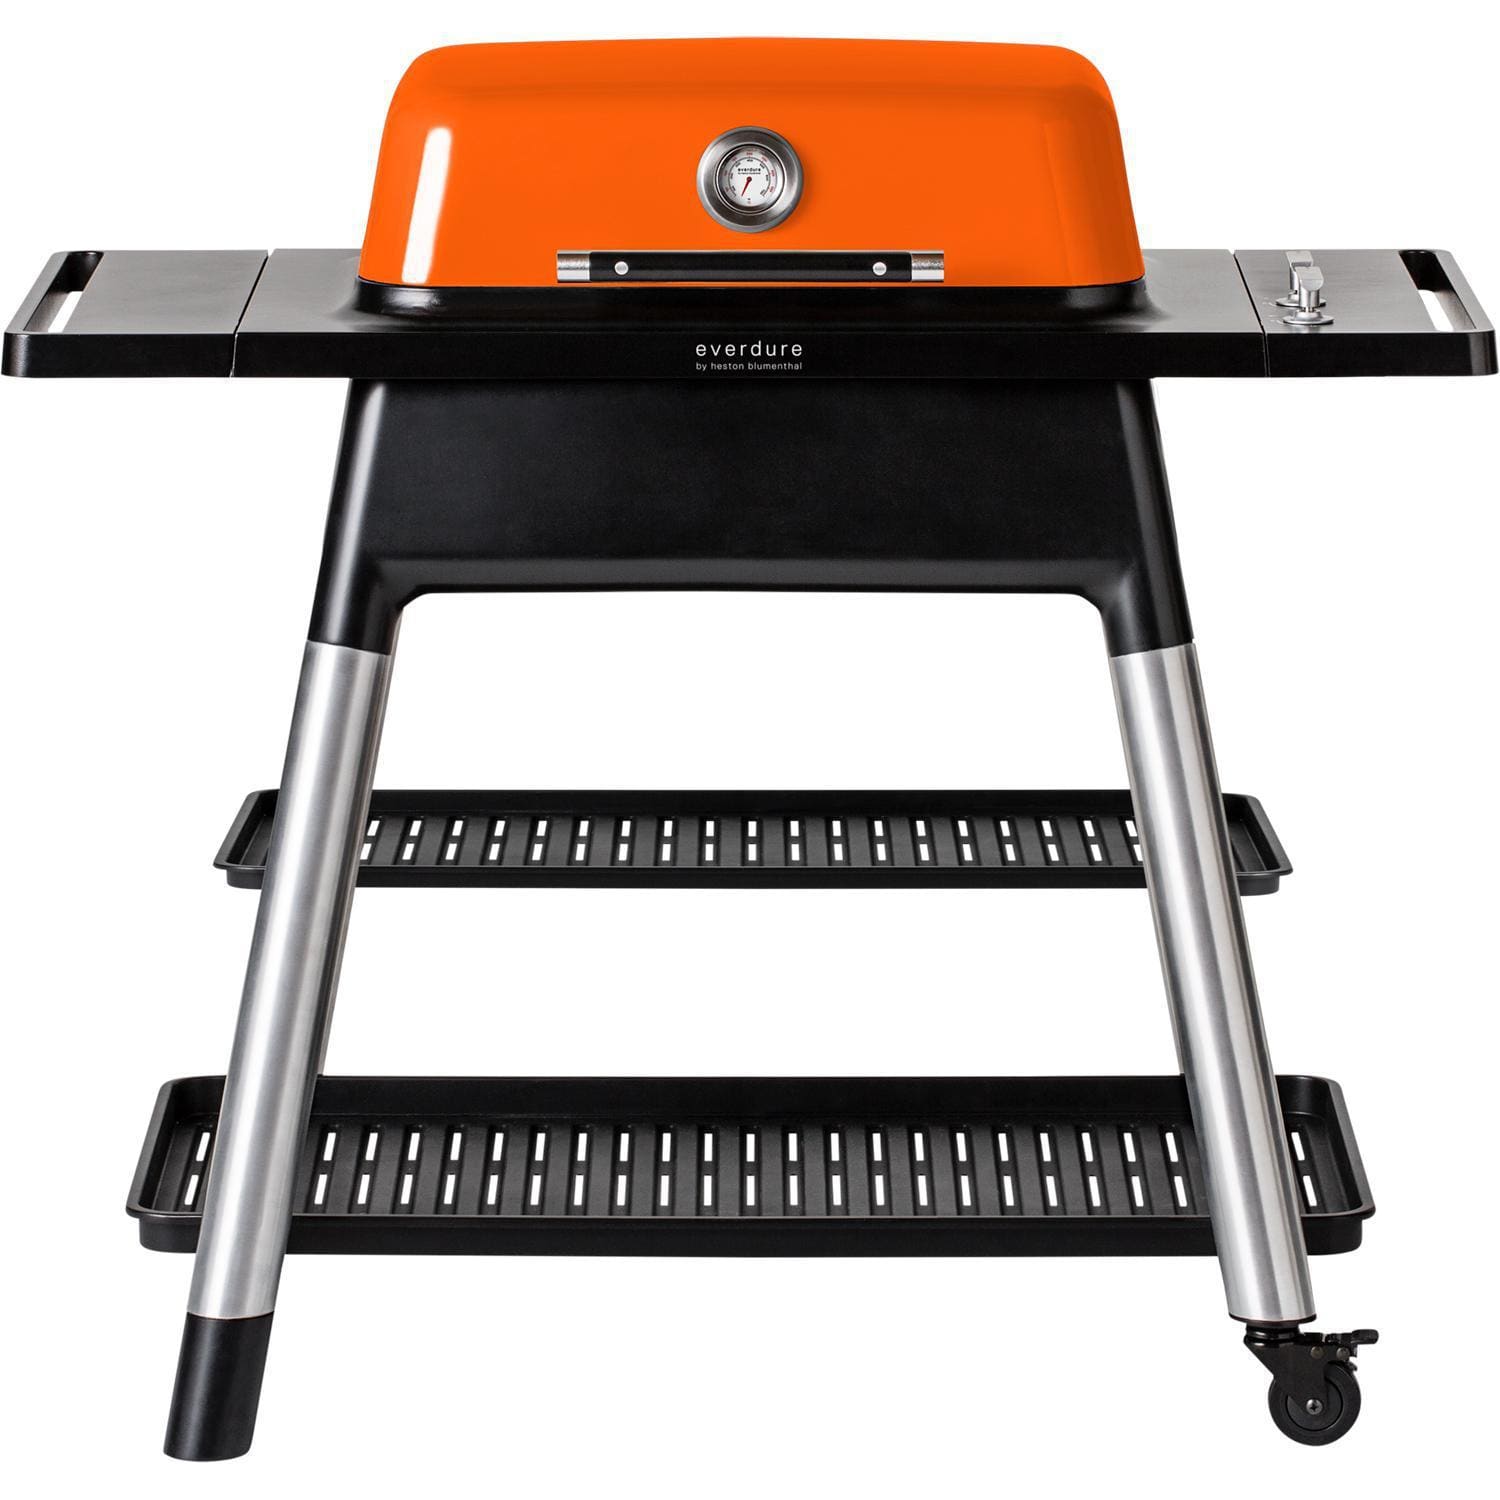 Everdure Propane Gas Grill Orange Everdure By Heston Blumenthal FORCE 48-Inch 2-Burner Propane Gas Grill With Stand